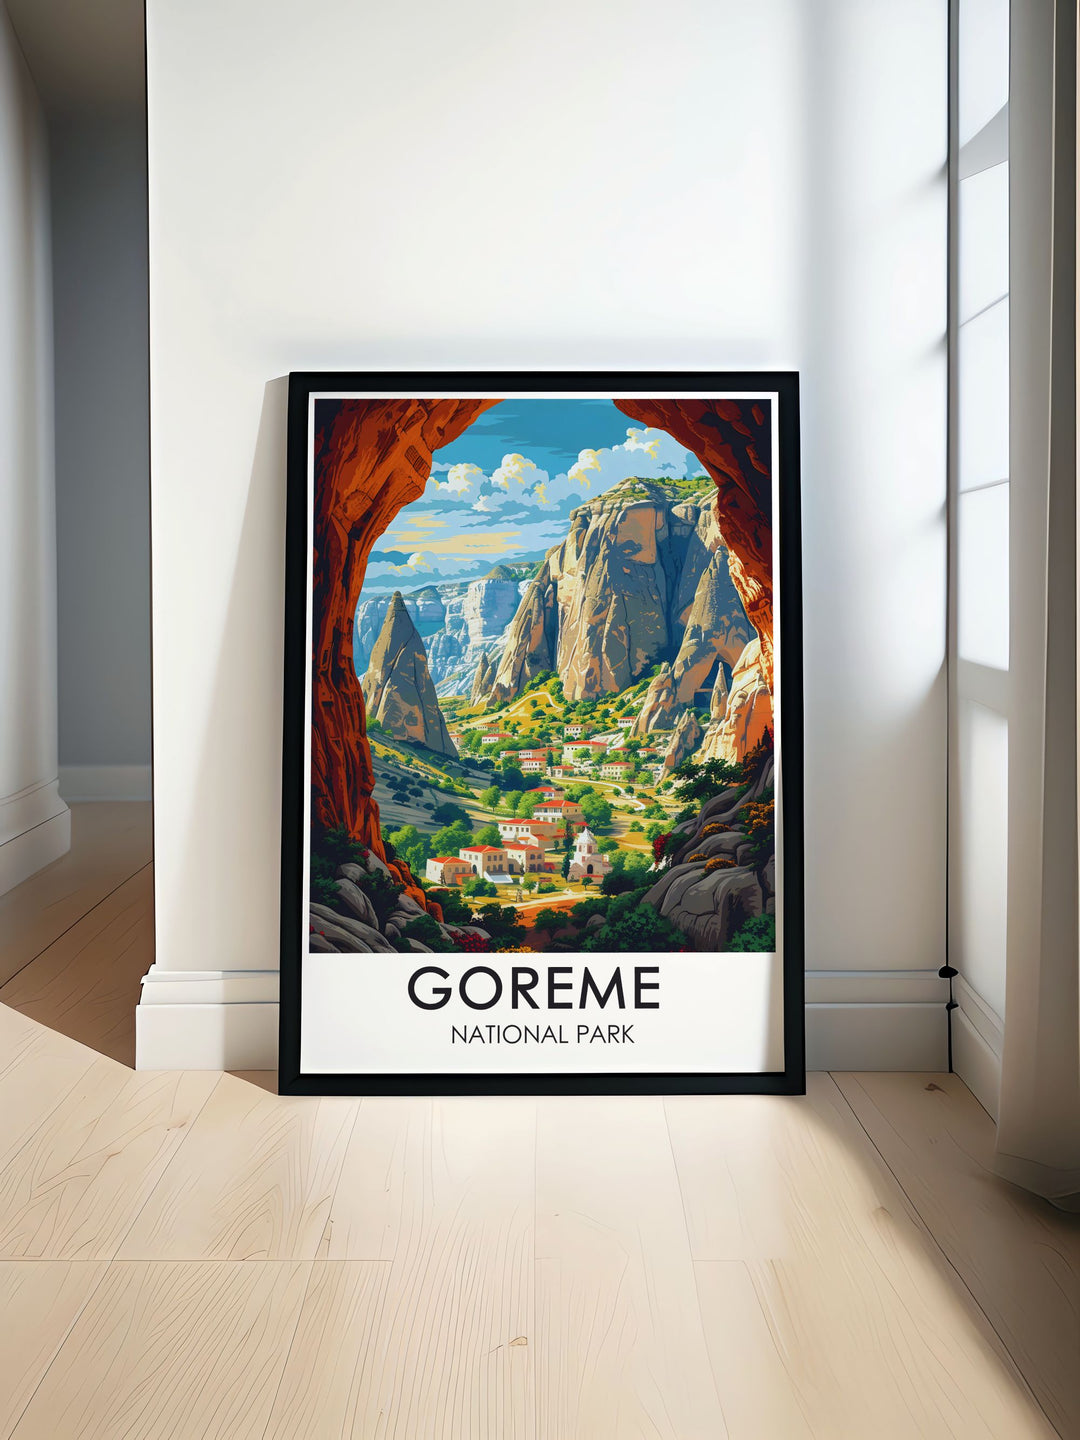 Featuring the magical scenery of Goreme National Park with its distinctive Fairy Chimneys and the fascinating Open Air Museum, this poster brings the enchanting beauty of Cappadocia, Turkey, into your home, perfect for any decor.